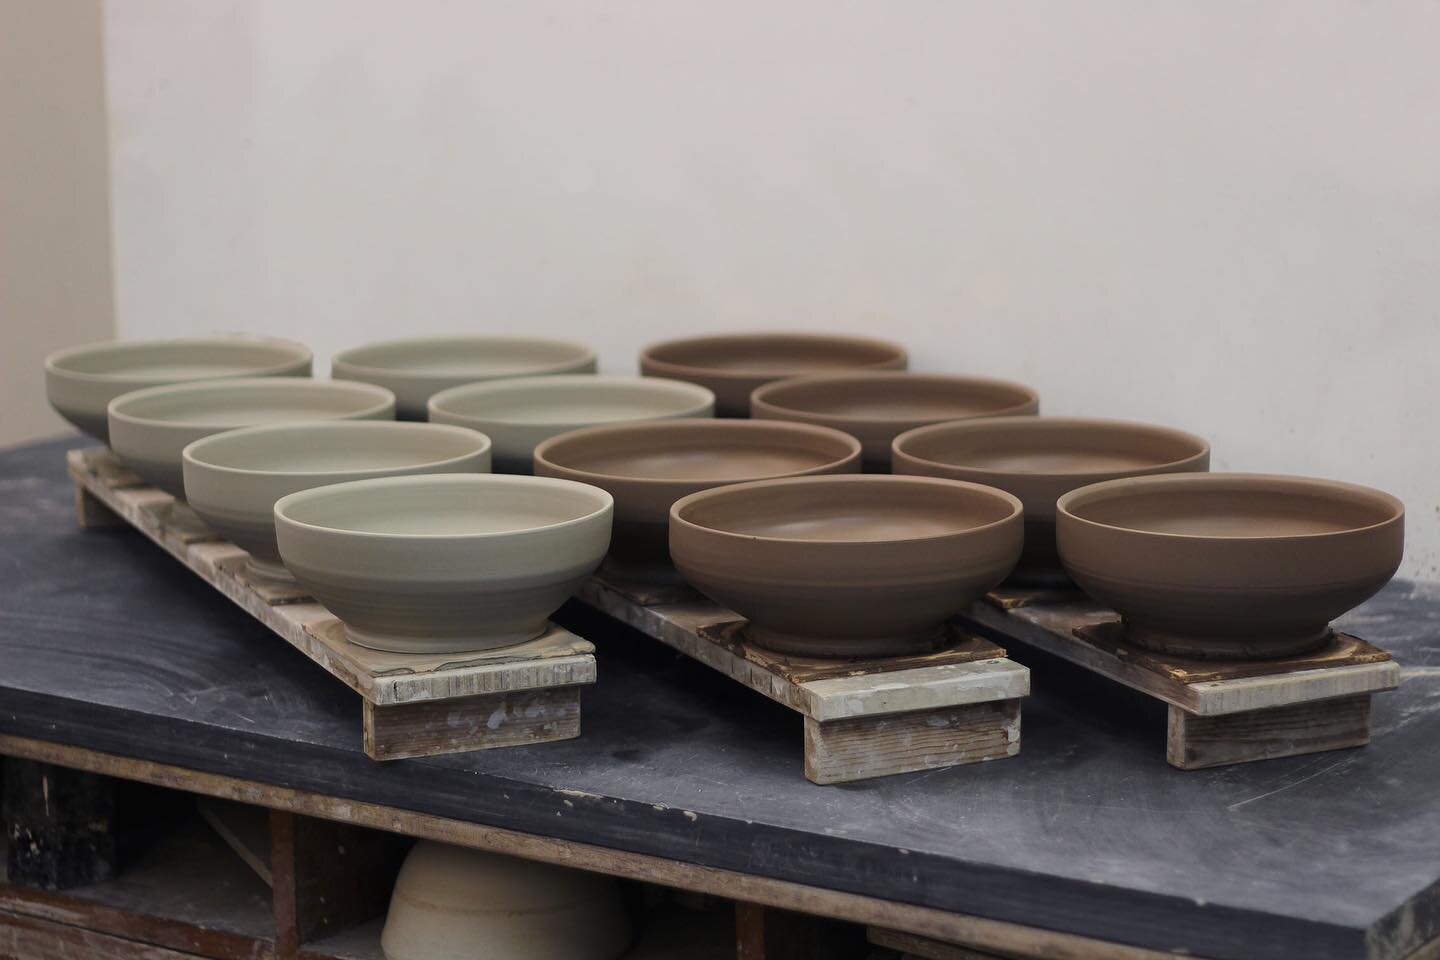 Freshly thrown shallow bowls, these are now turned, finished and are set aside to dry slowly before heading to the kiln for first firing.
I changed the design slightly to accommodate a slightly taller foot ring. It&rsquo;s not a huge change but somet